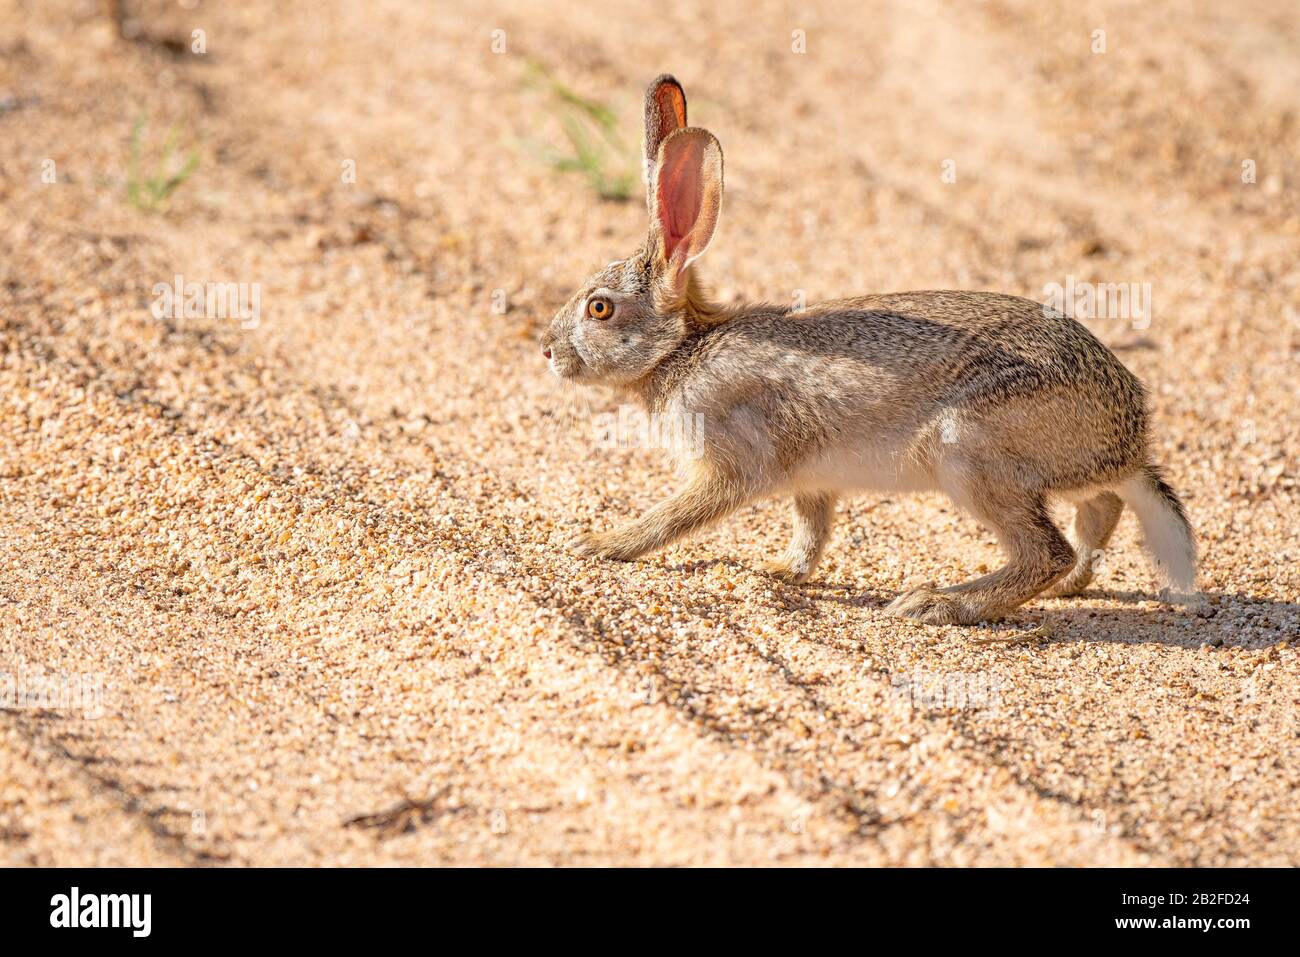 A scrub hare - Lepus saxatilis - tentatively crosses a sandy dirt road with tyre tracks in the Kruger National Park in South Africa Stock Photo